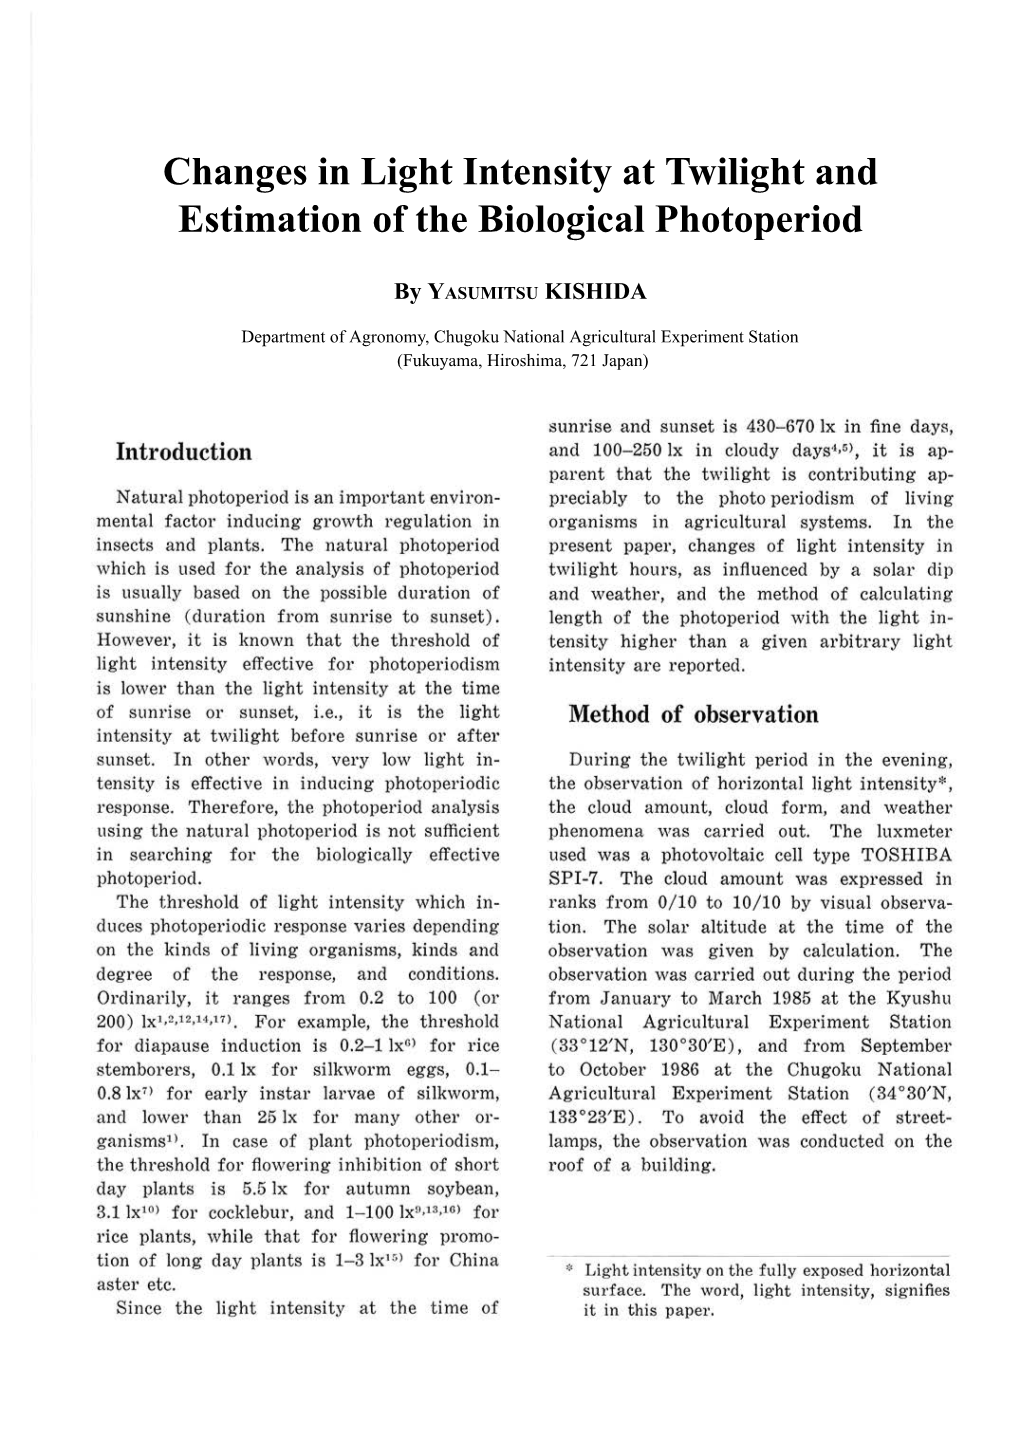 Changes in Light Intensity at Twilight and Estimation of the Biological Photoperiod